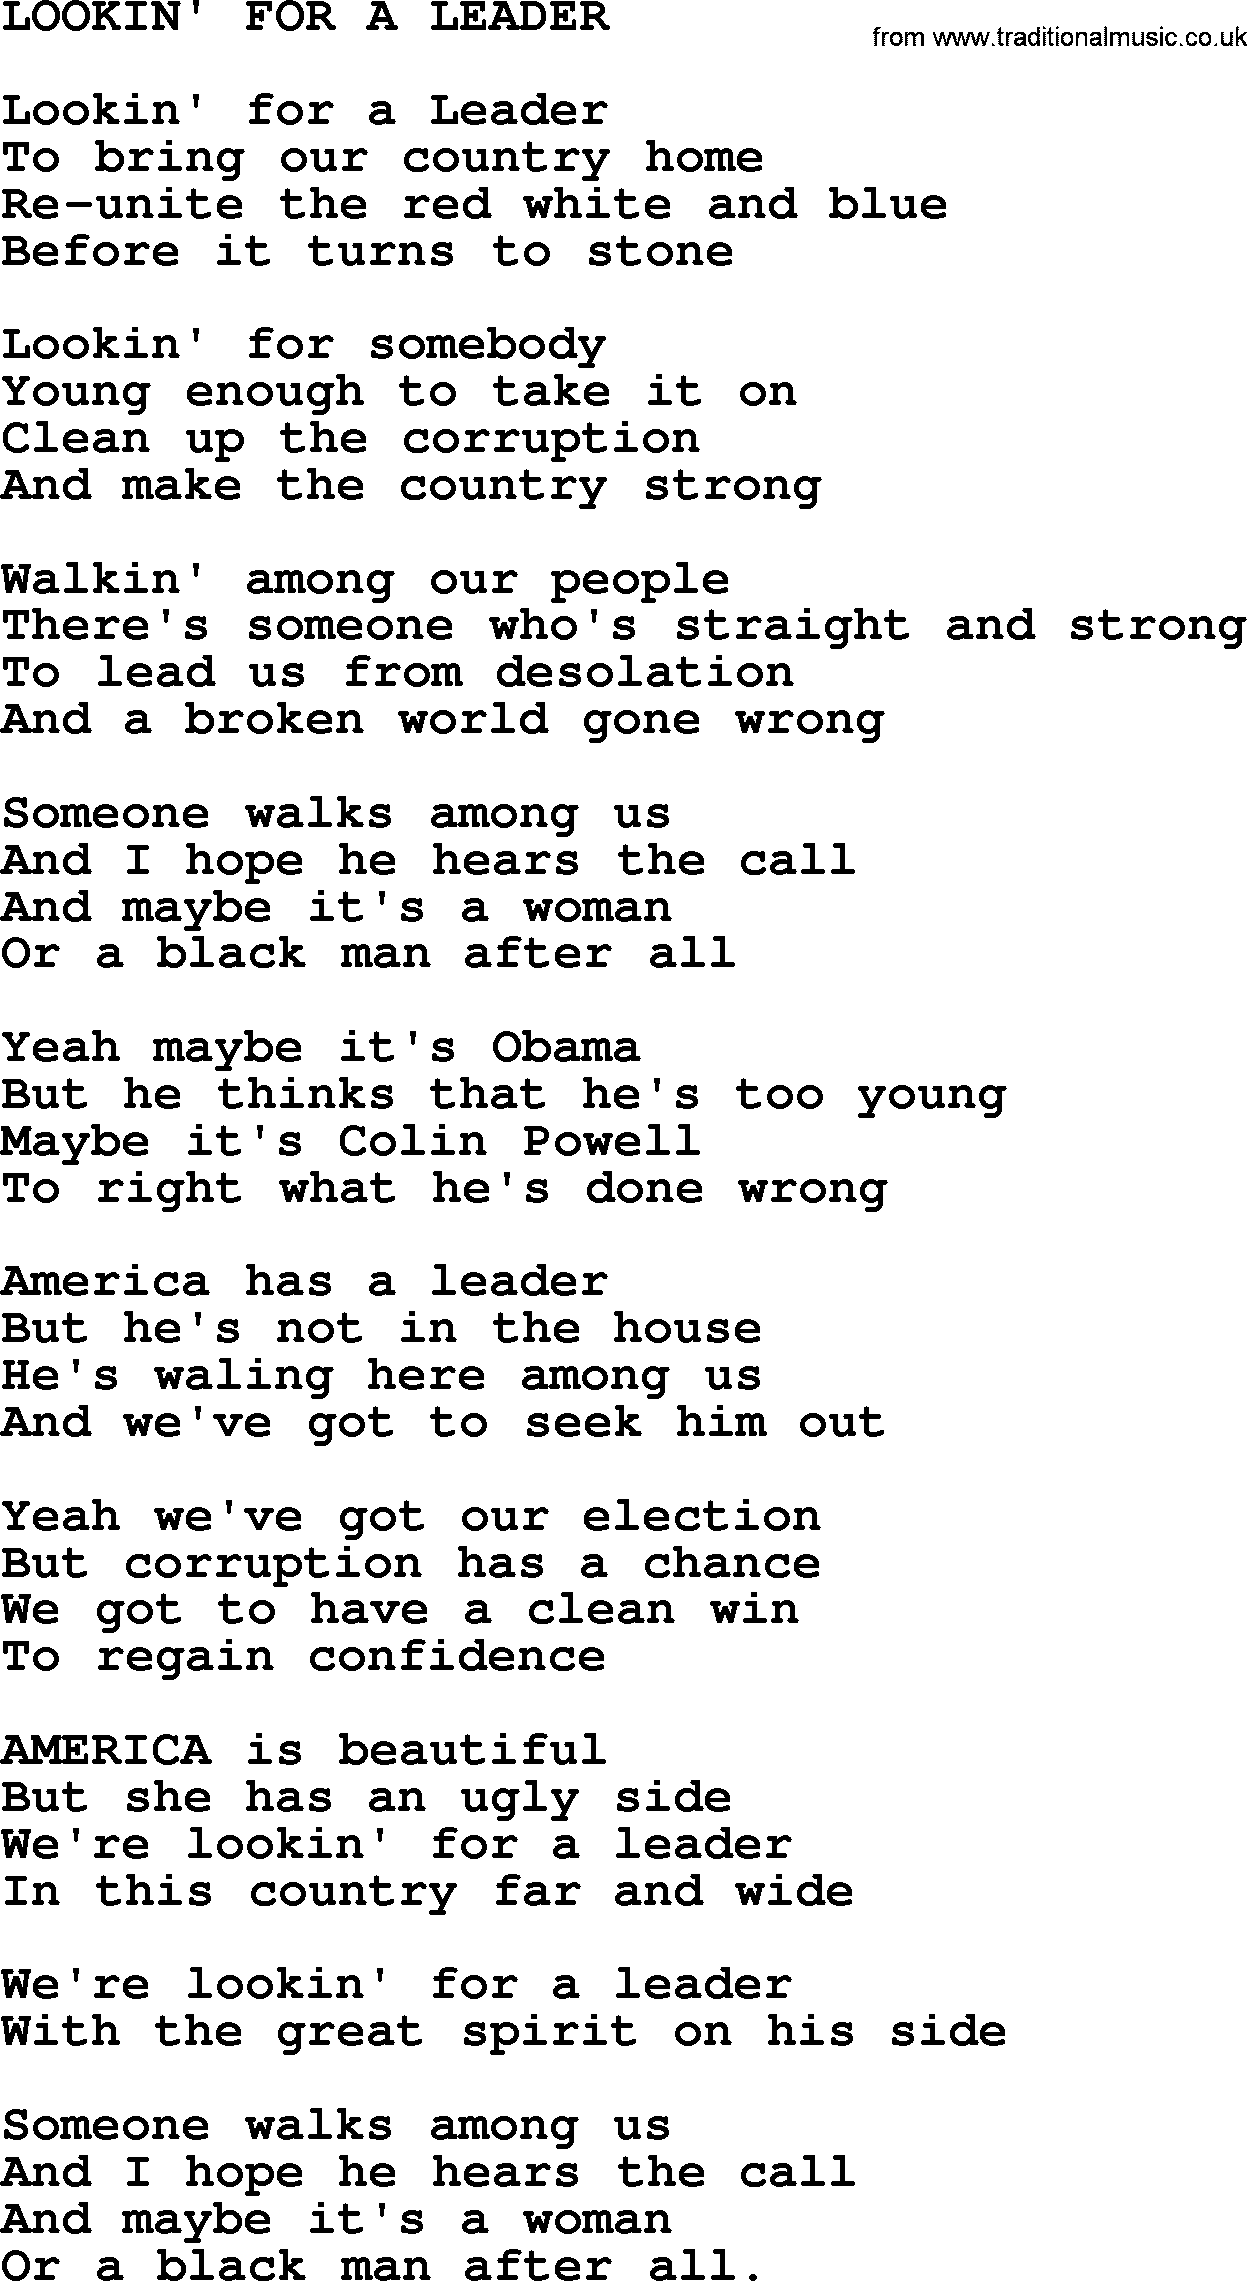 The Byrds song Lookin' For A Leader, lyrics